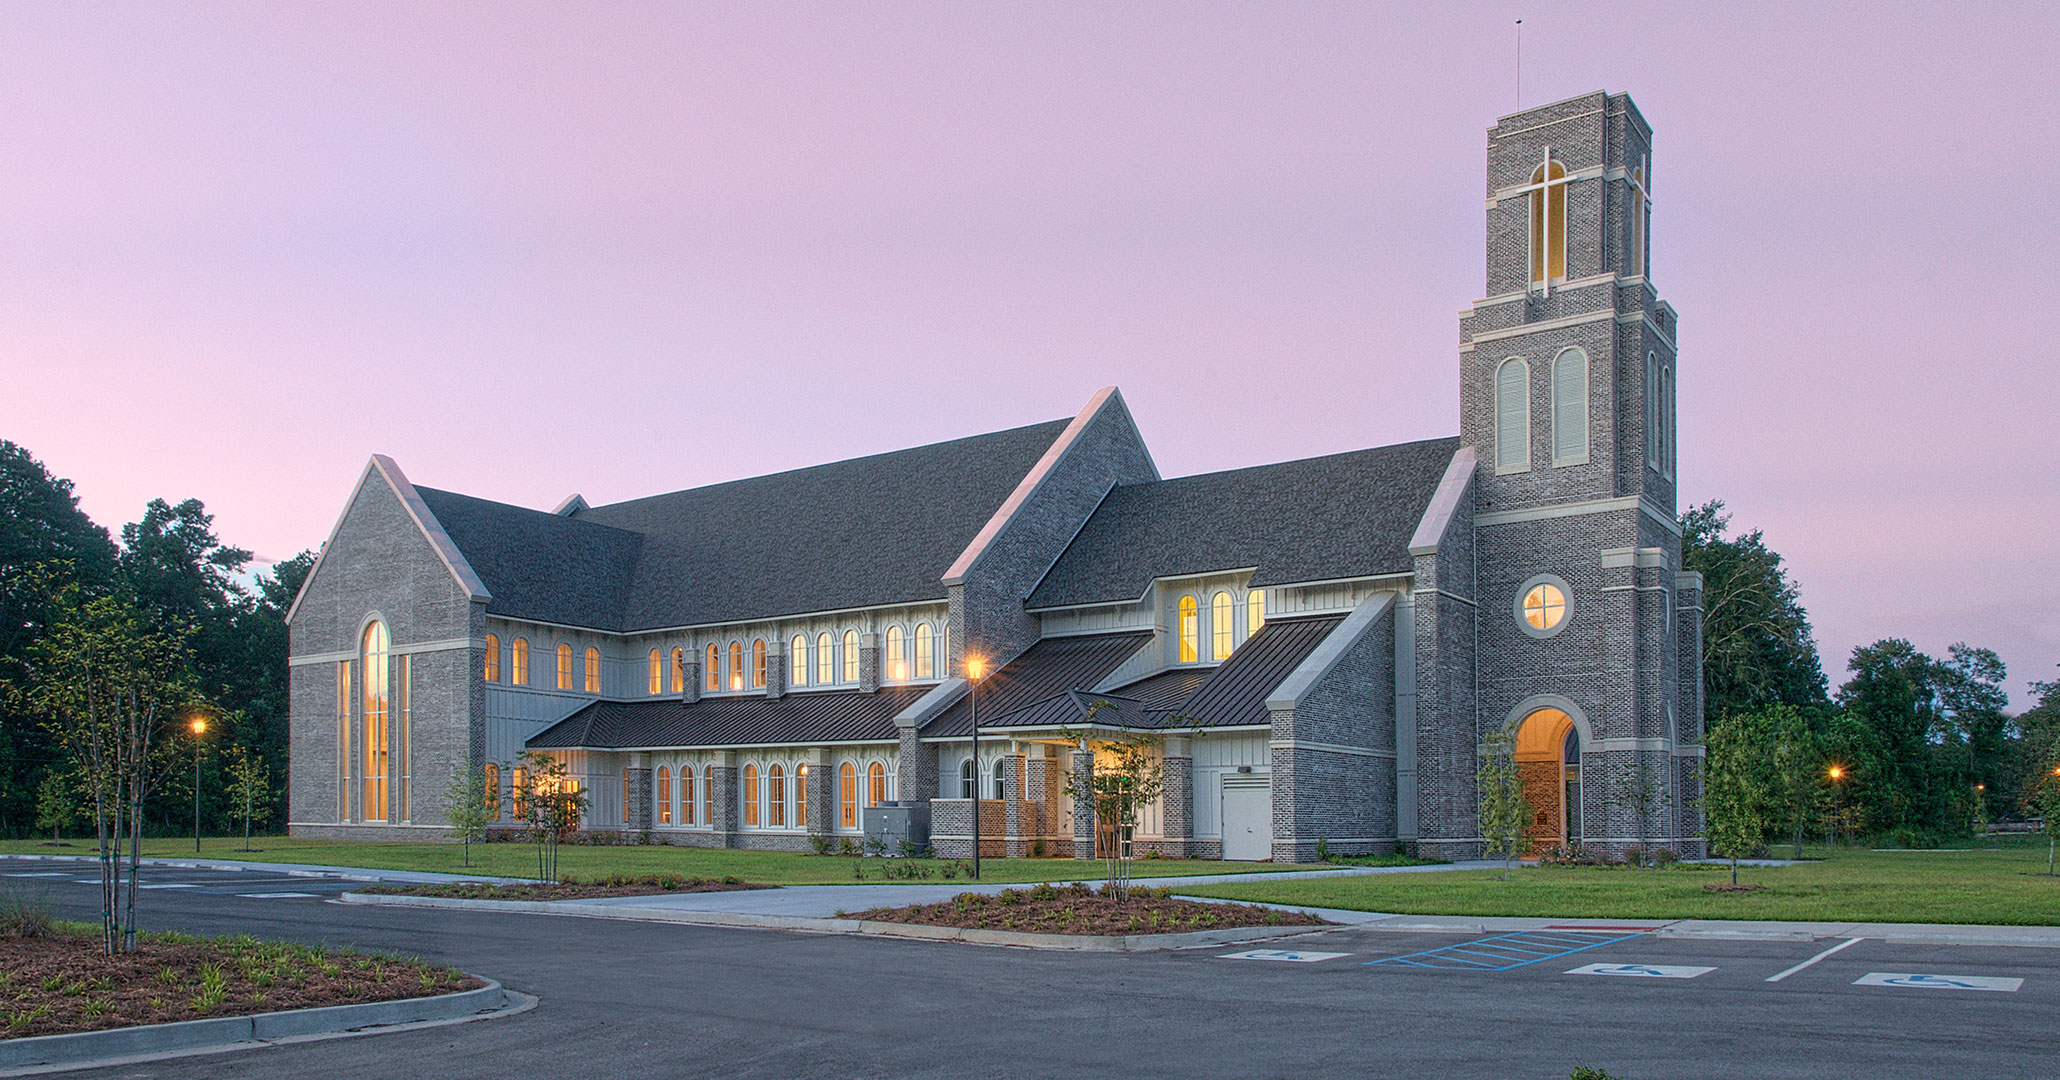 Boudreaux architects worked with St. Anne in Richmond Hill, GA to expand their current church footprint.